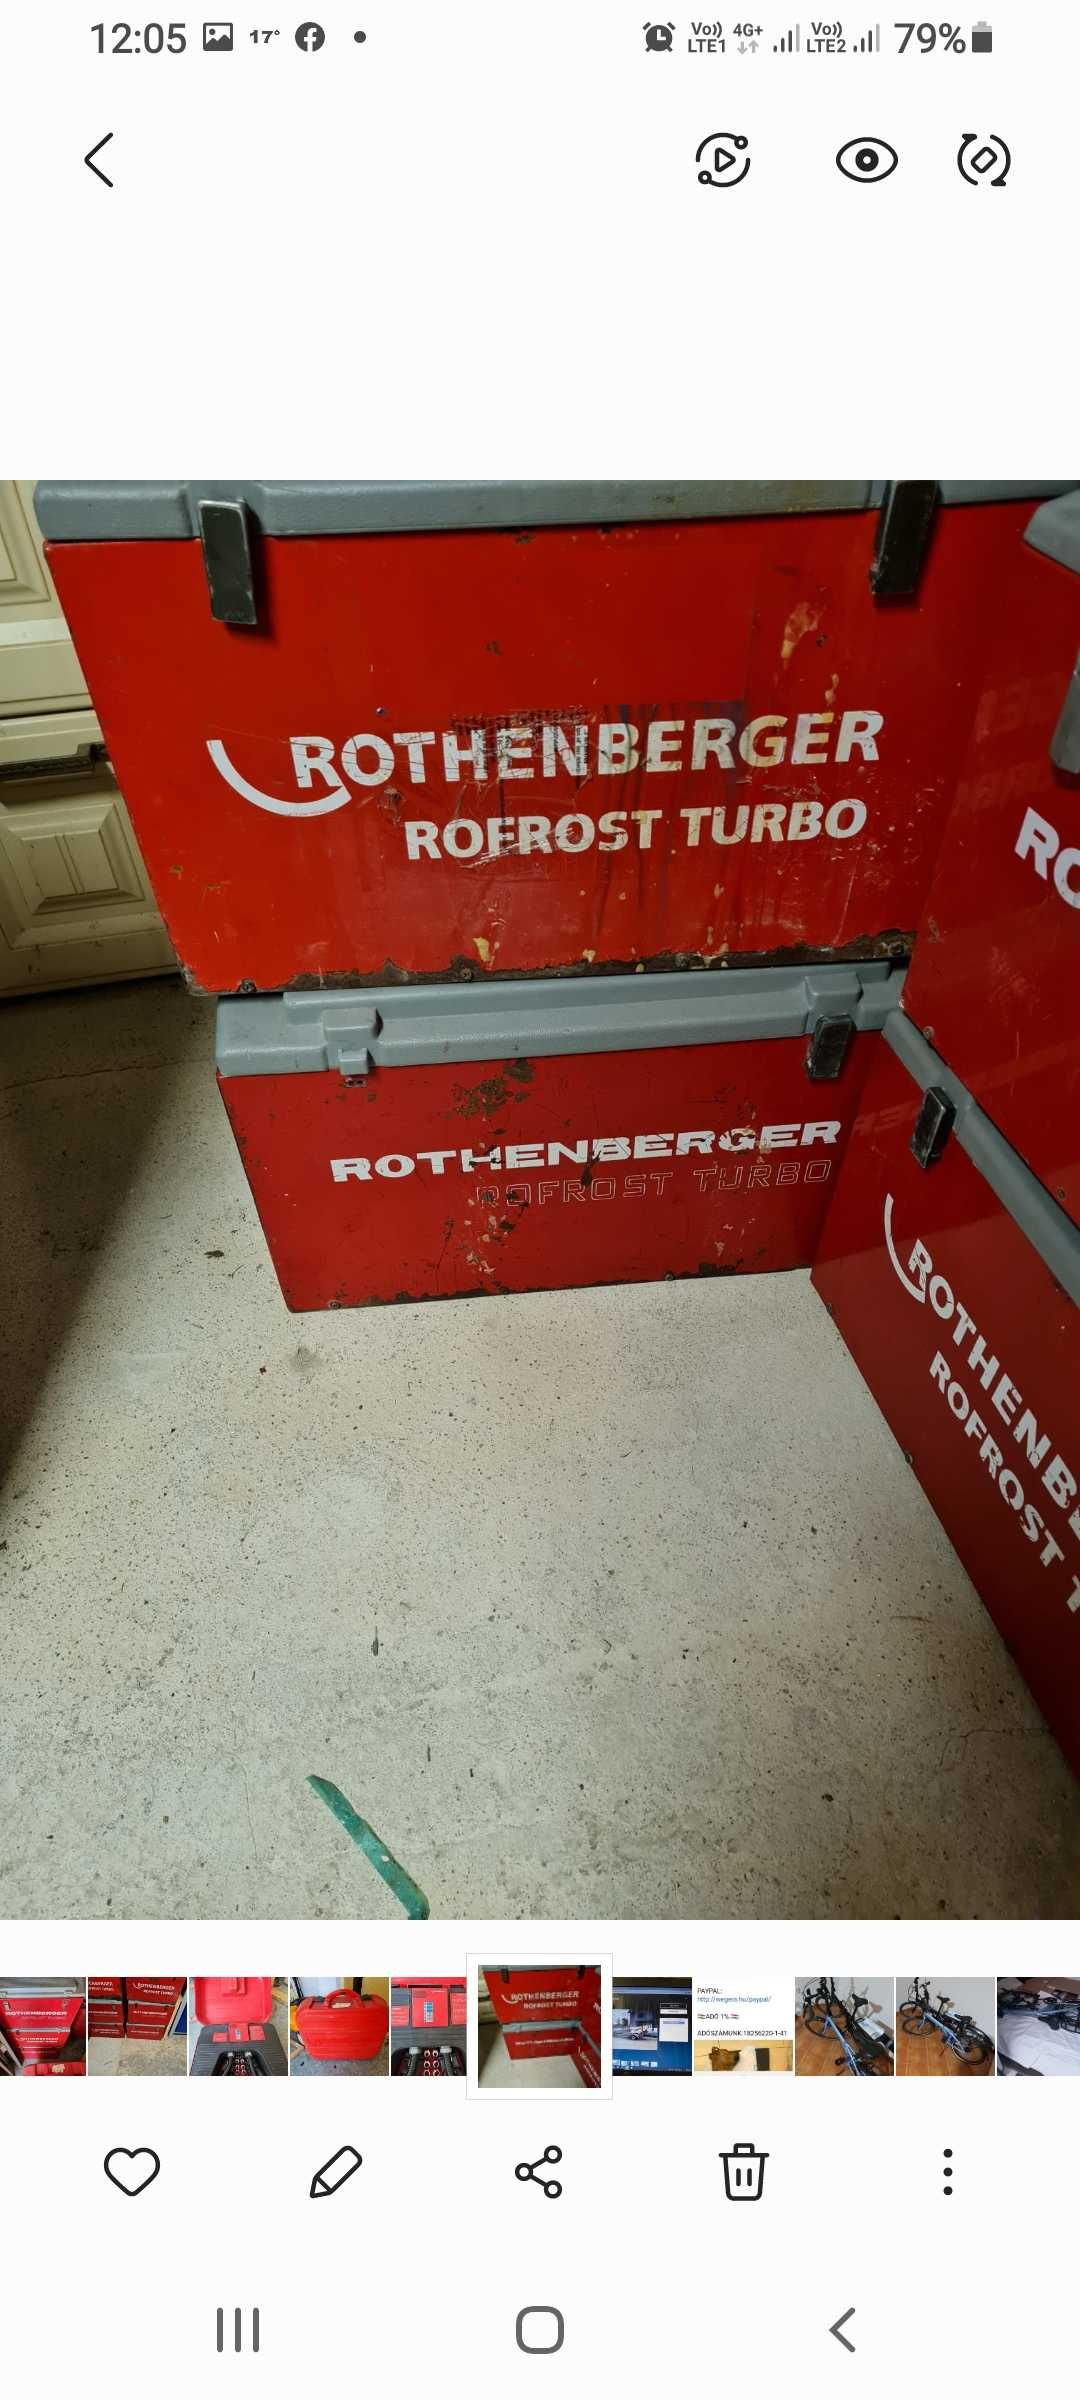 Rothenberger Refrost Turbo